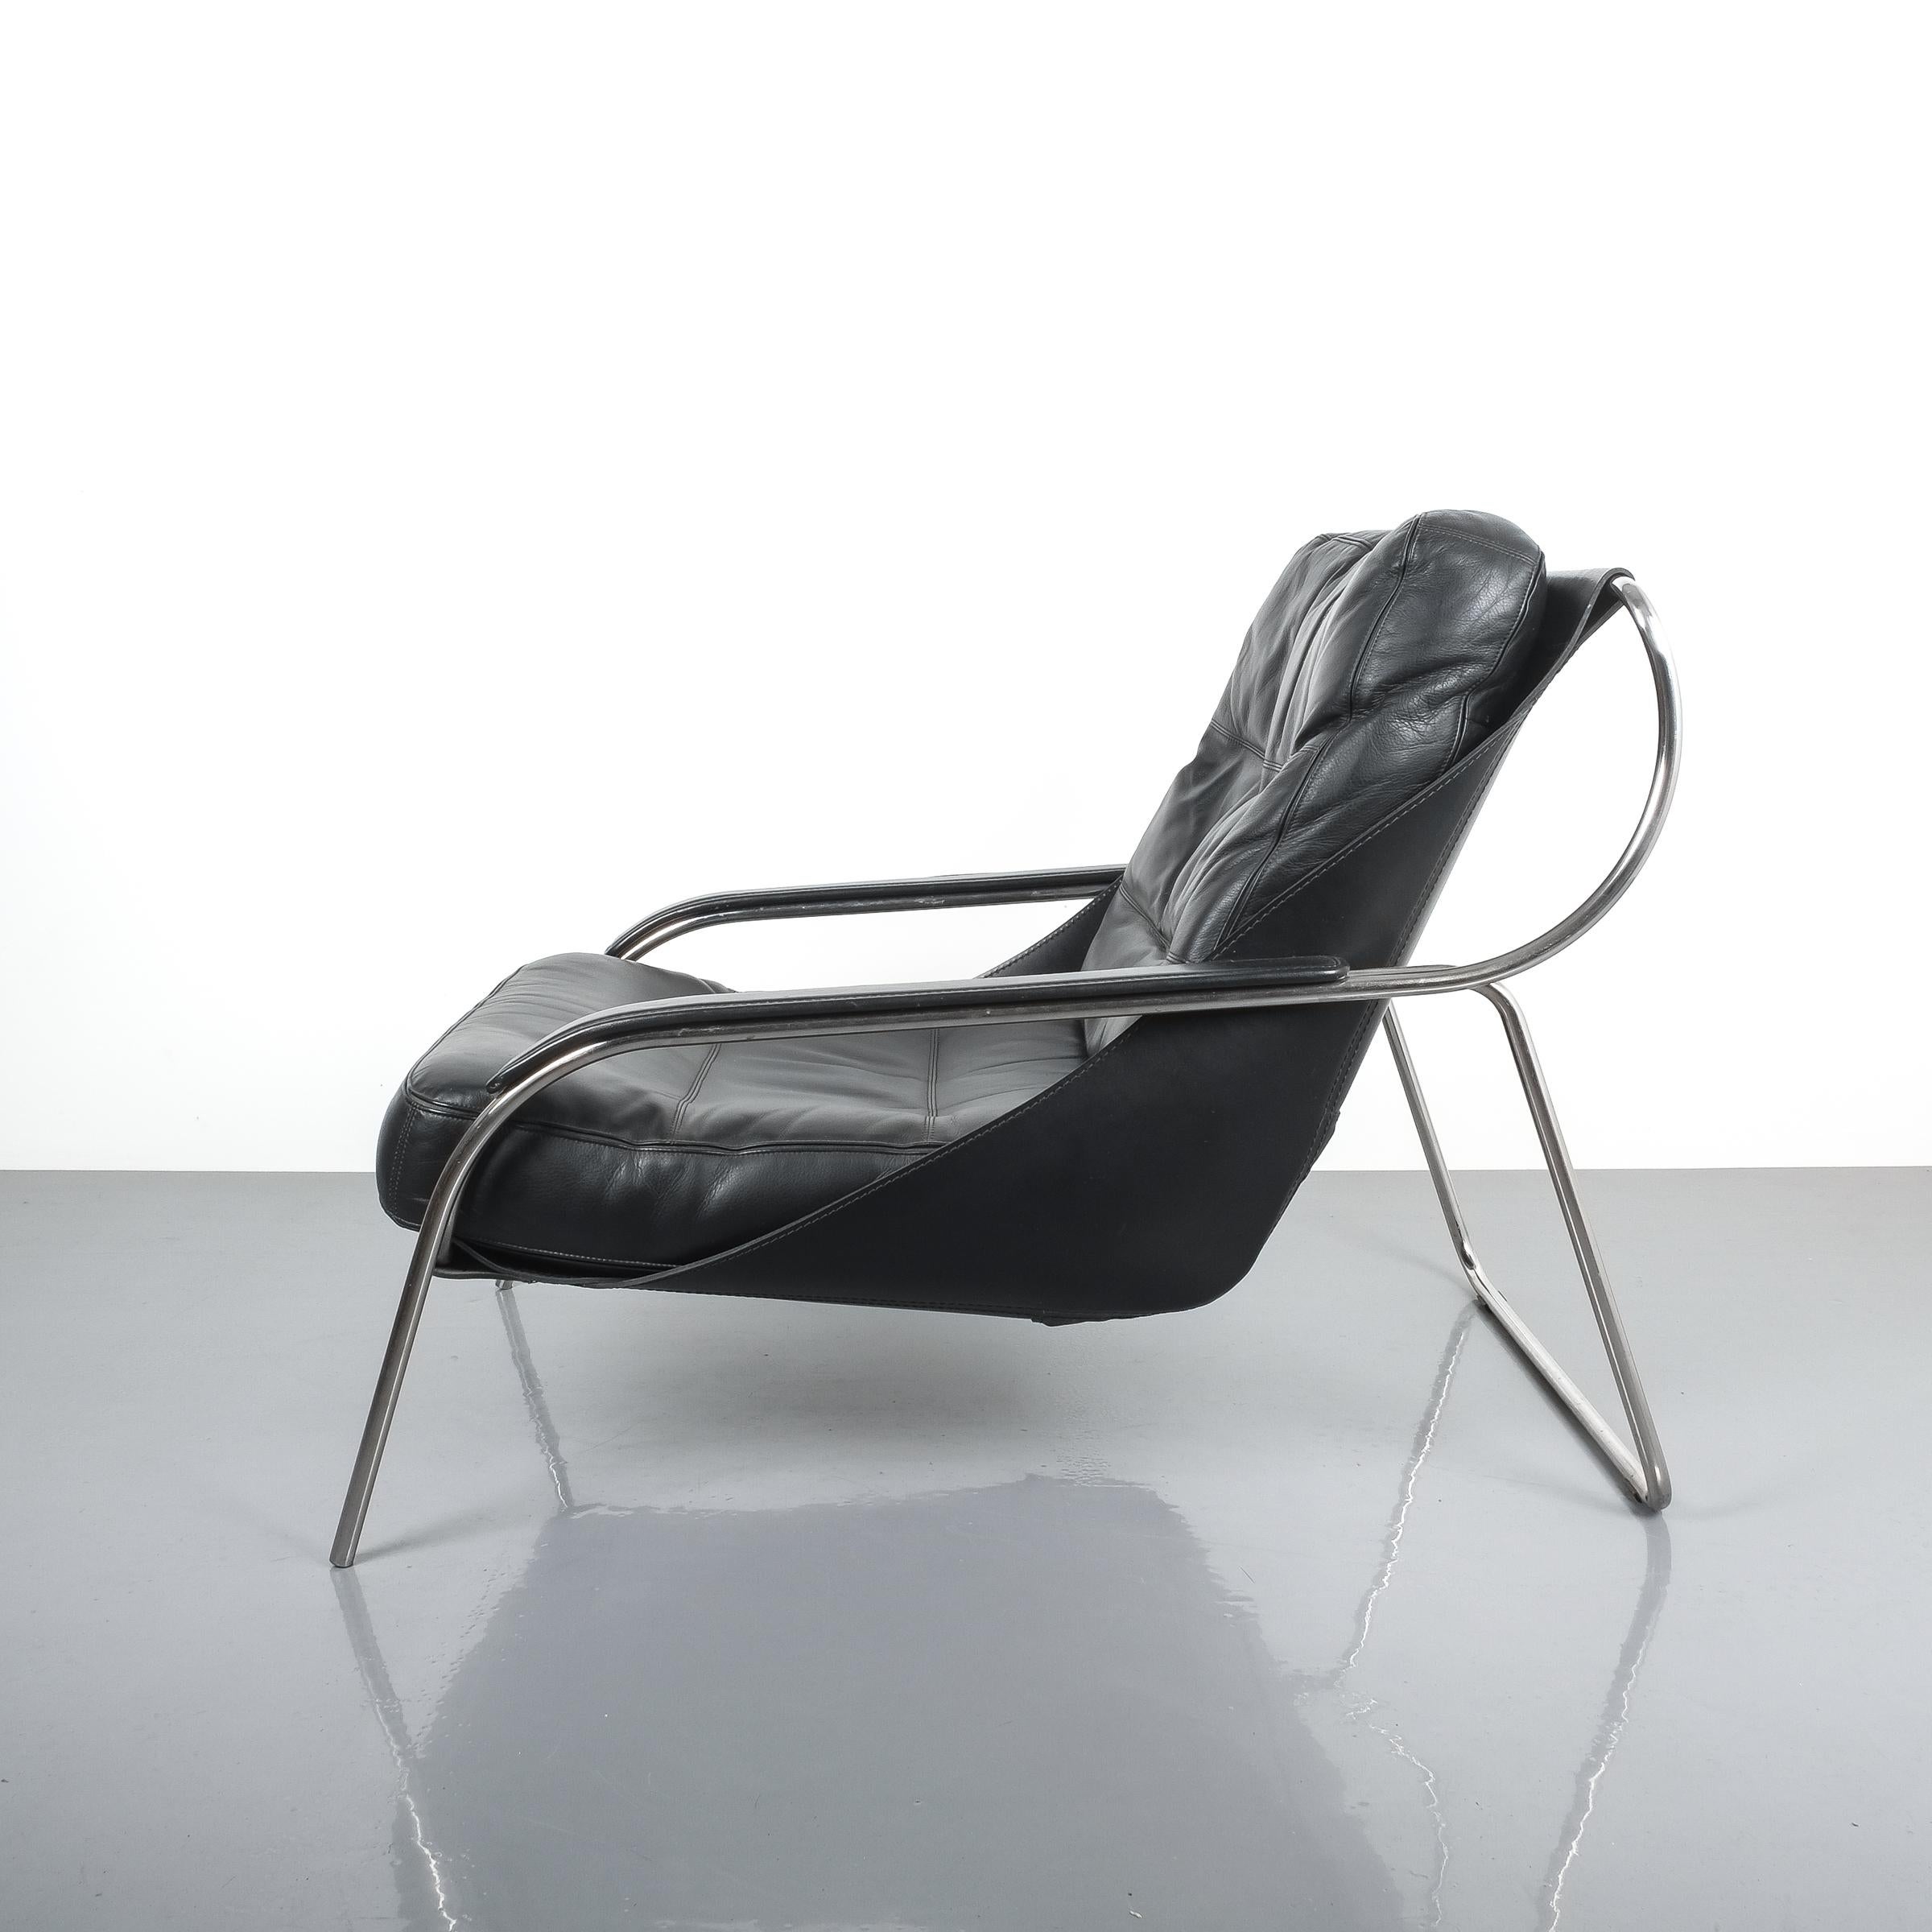 Elegant Maggiolina chair by Zanotta designed by Marco Zanuso, originally designed in 1947. Later production. Cowhide sling supports one large Nappa leather cushion. A stainless steel frame supports this very comfortable and sleek lounge chair. we